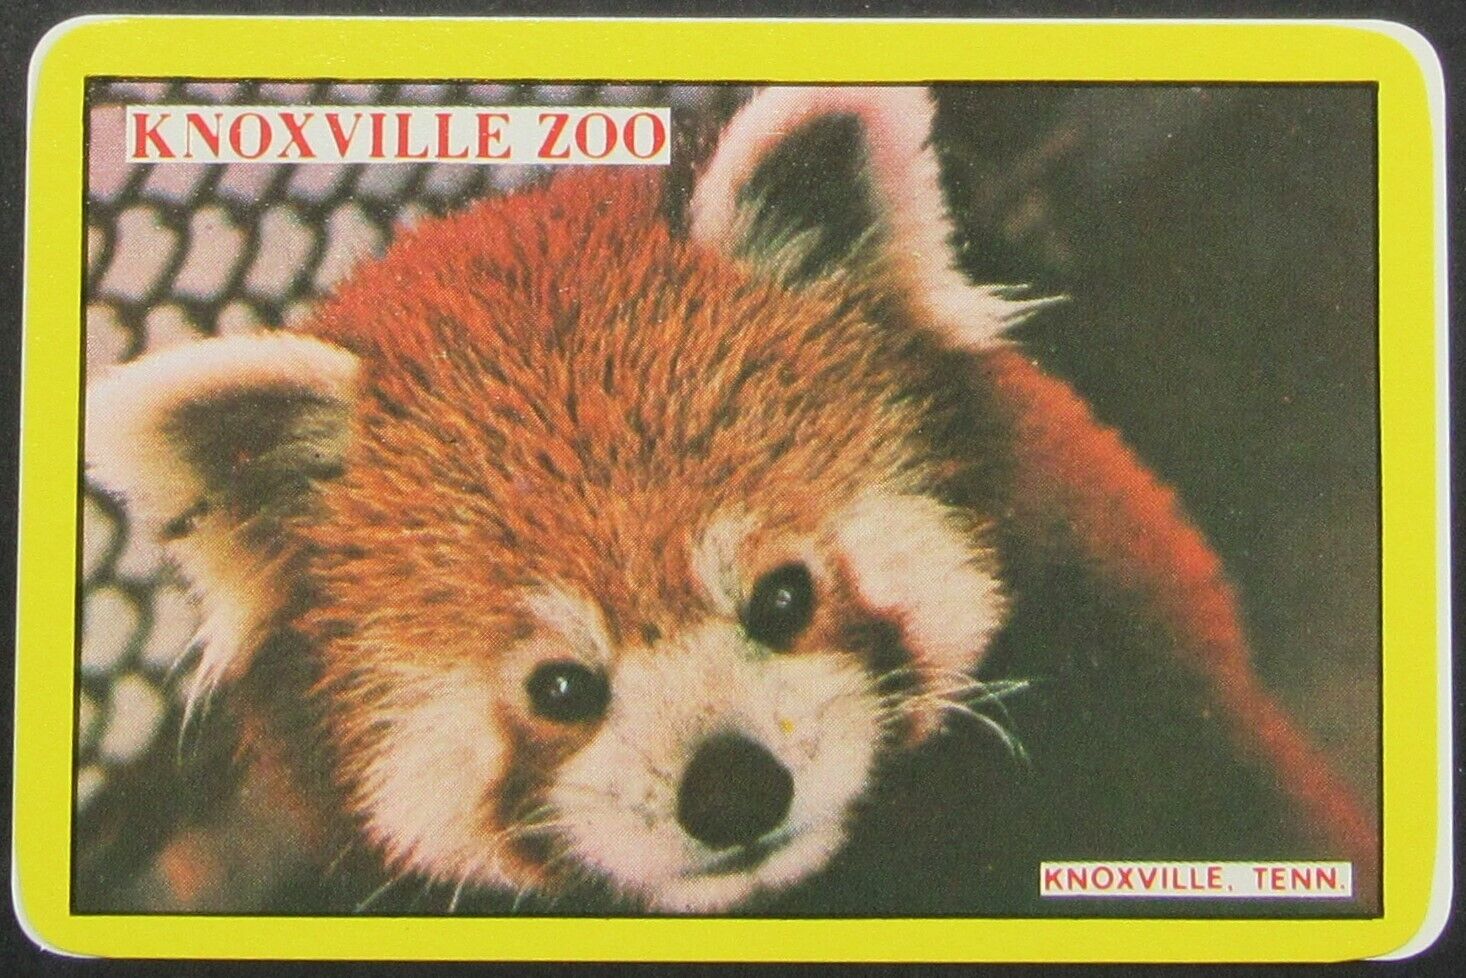 Knoxville Zoo Knoxville Tennessee Single Swap Playing Card 